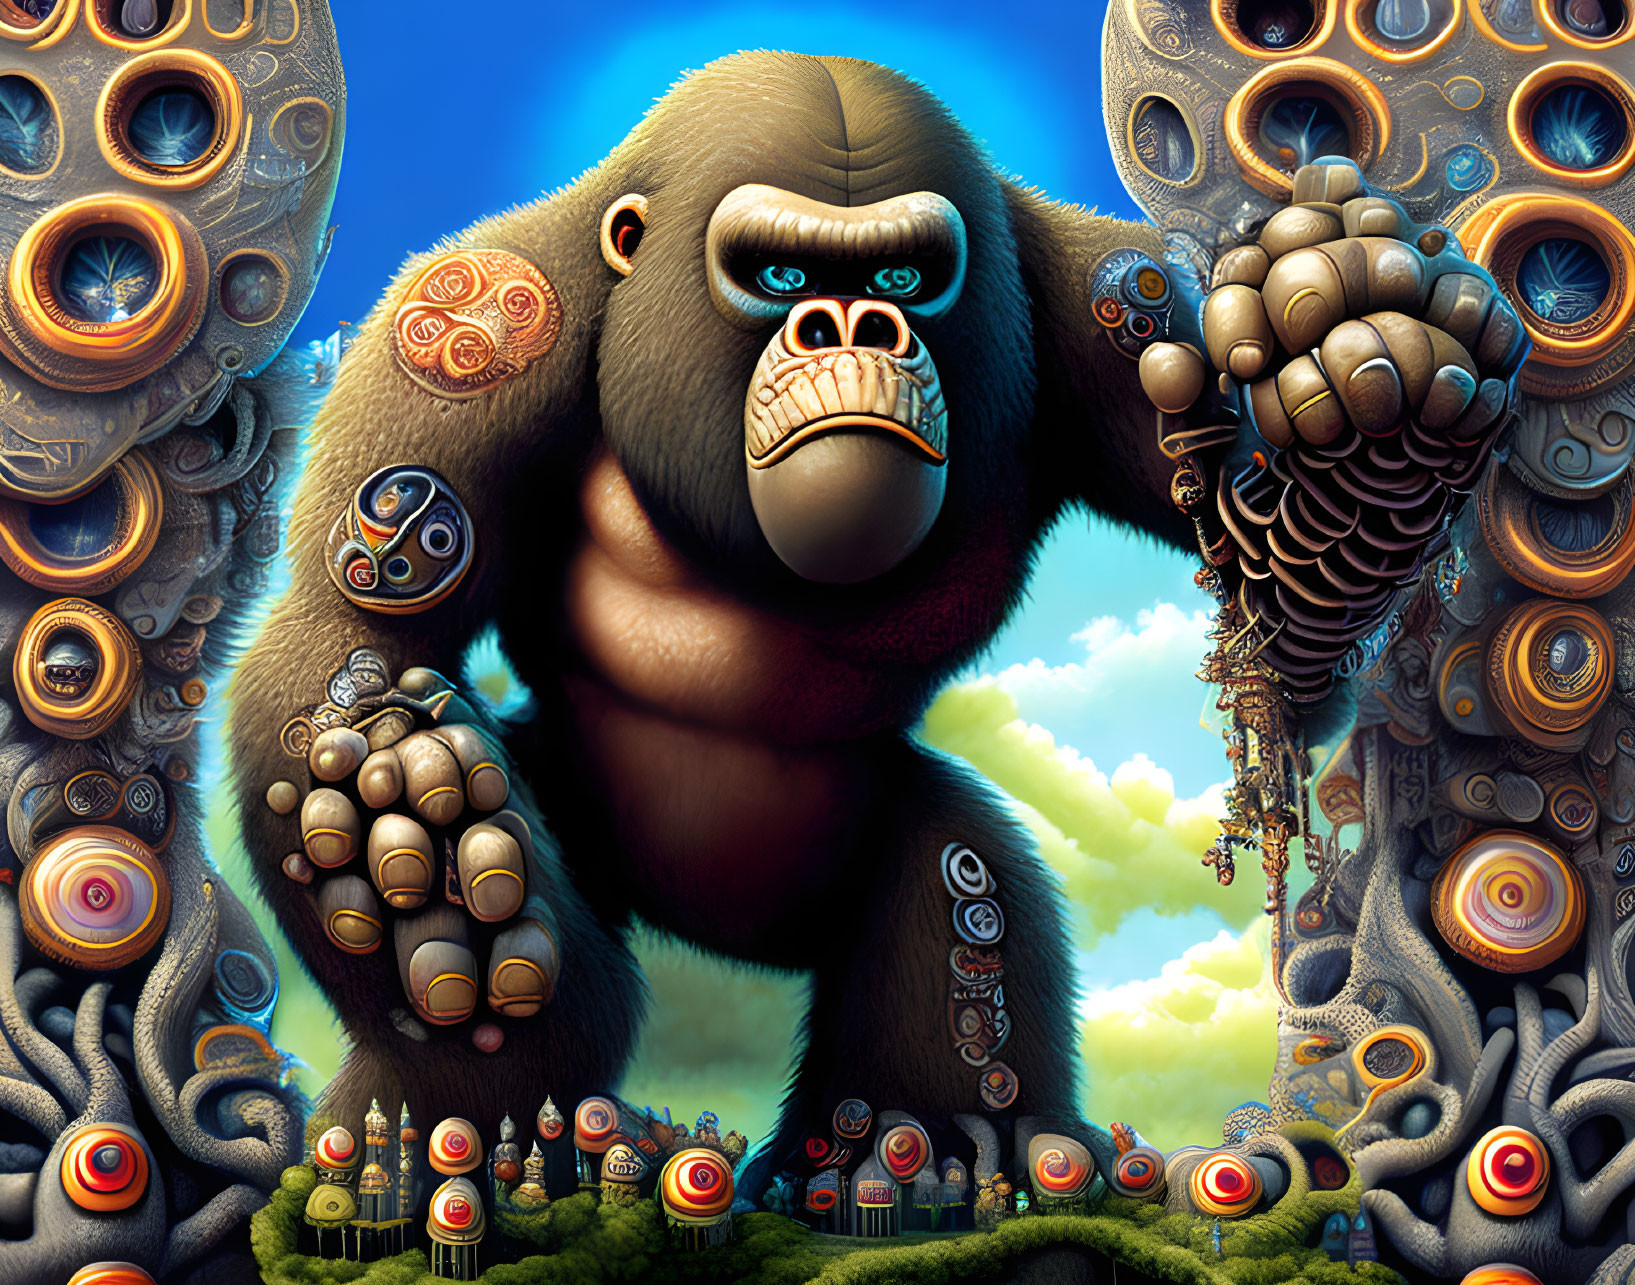 Colorful surreal artwork featuring a tribal gorilla amidst ornate circles and sky